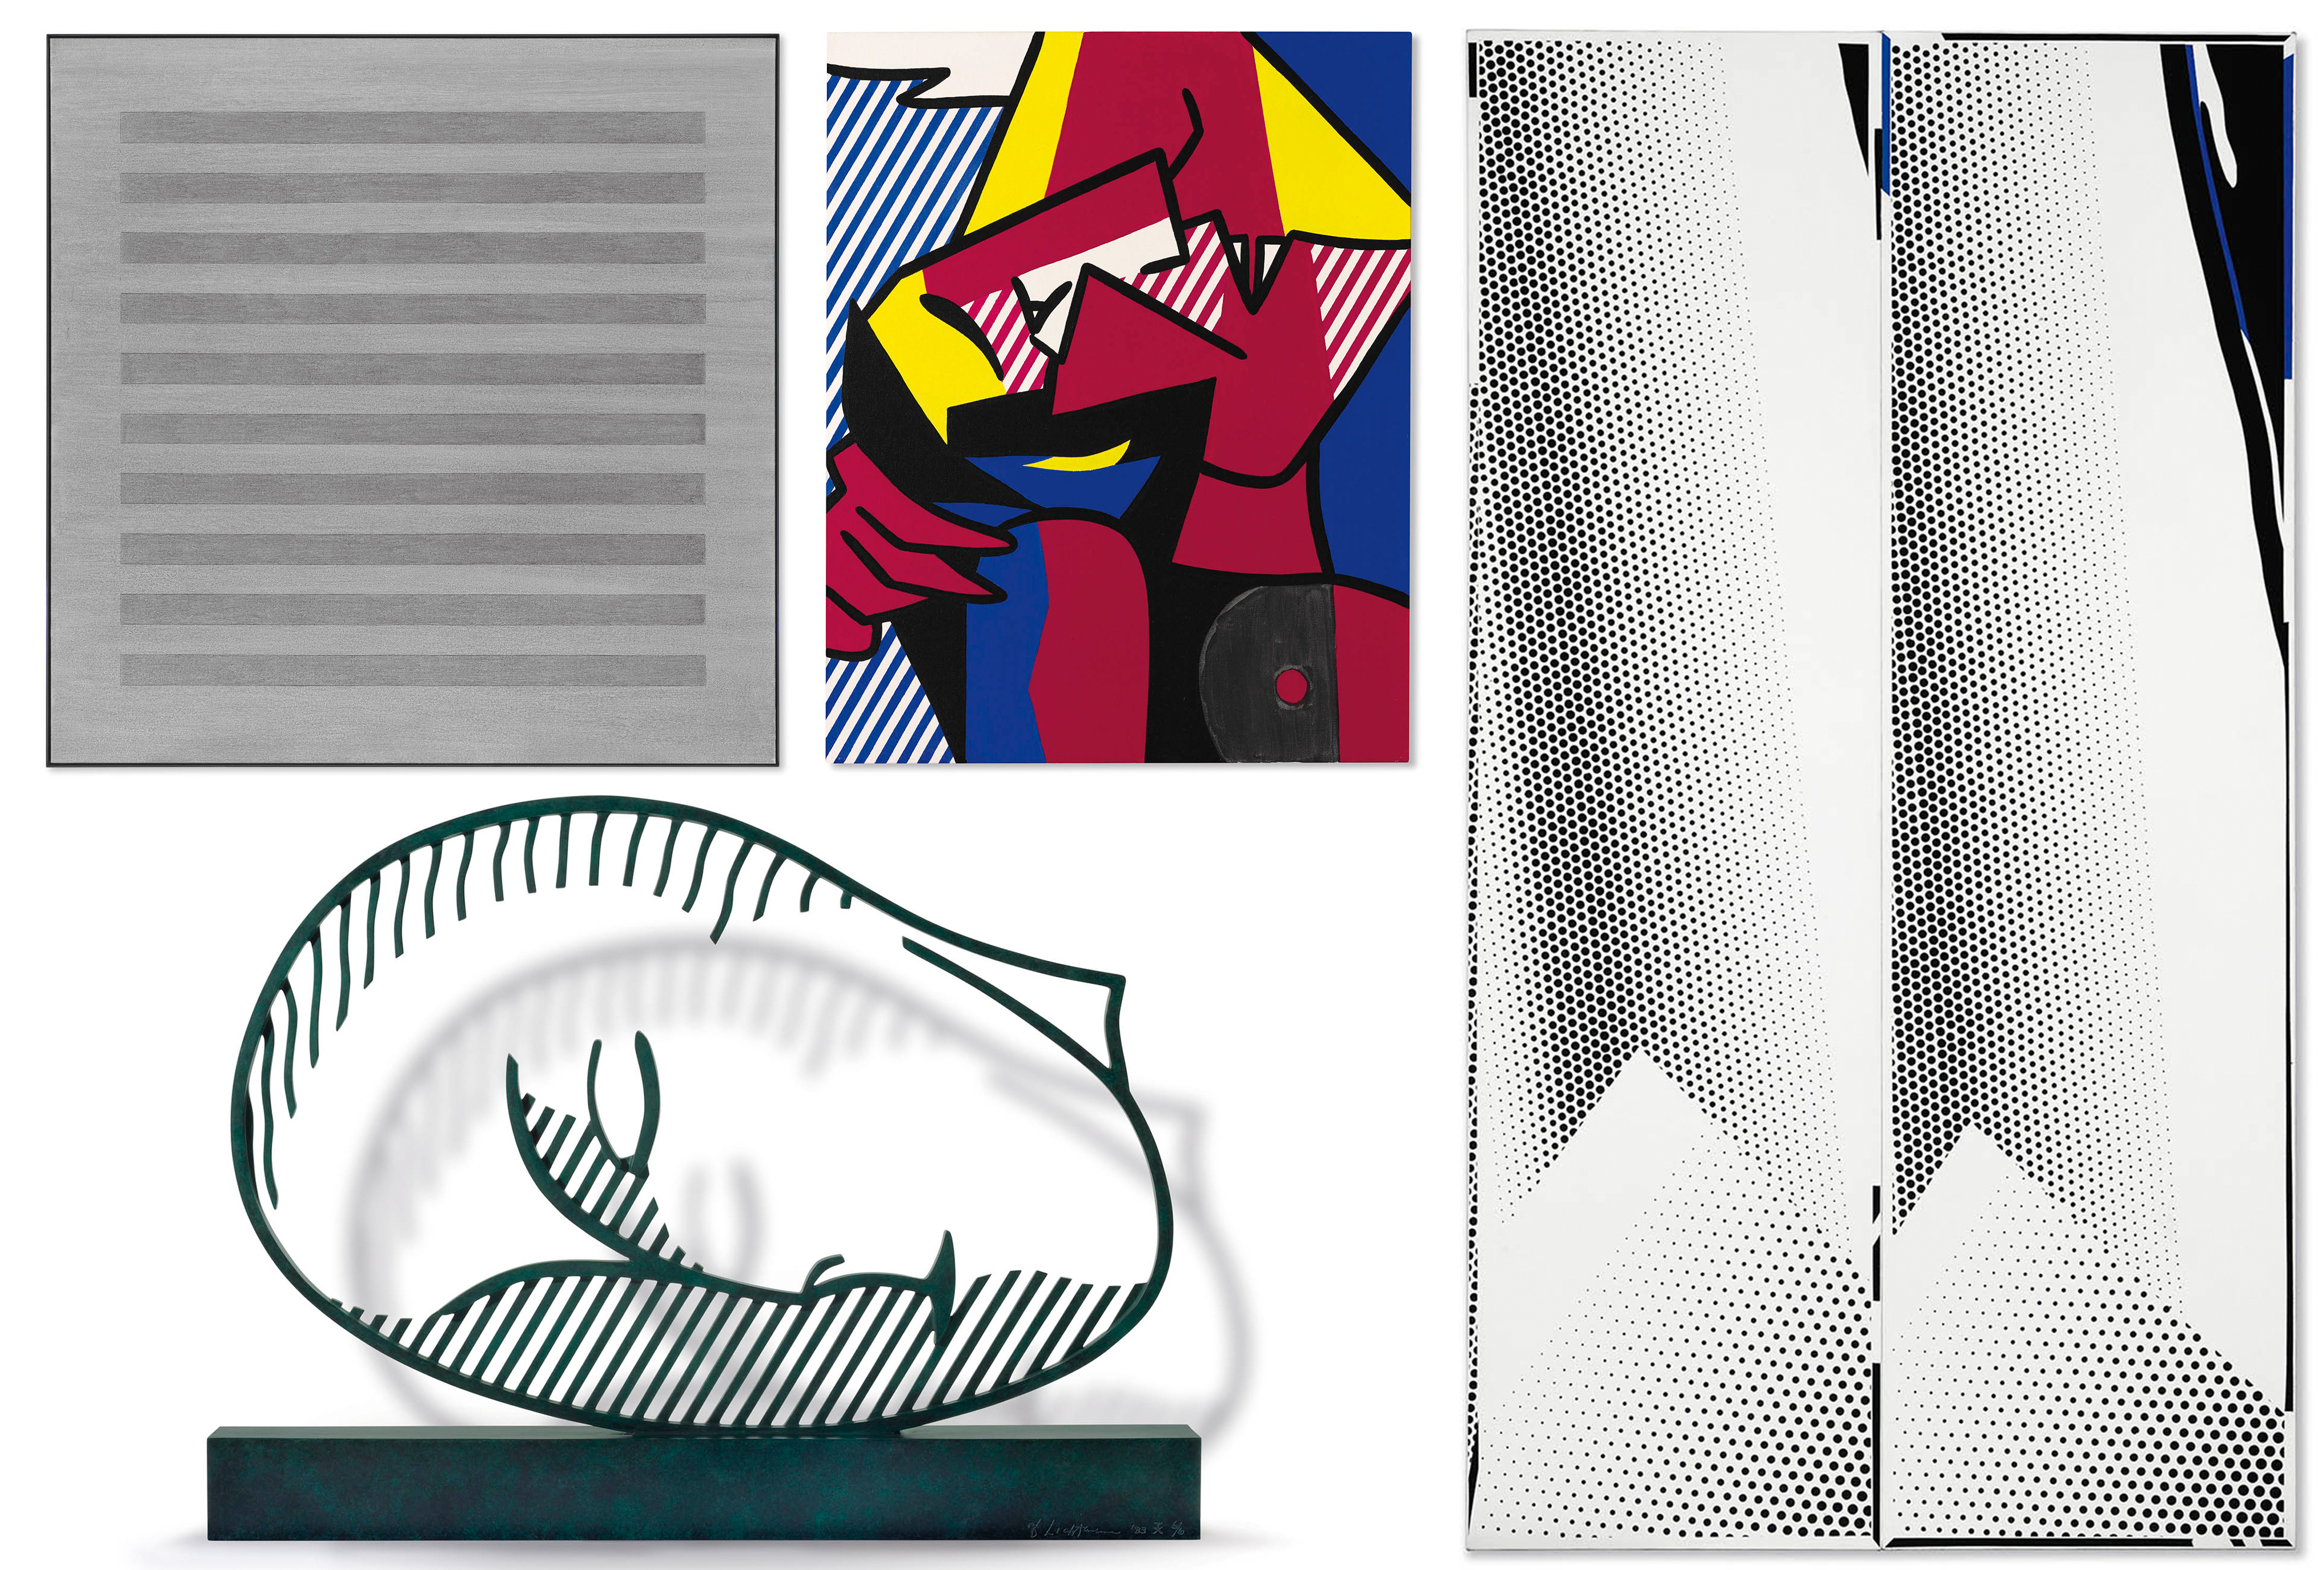 Pieces in Robert Olnick's art collection (clockwise from left: An acrylic and graphite-on-canvas work from 1983 by Agnes Martin, <em>Despair</em>, from 1979, by Roy Lichtenstein, <em>Double Mirror</em>, from 1970, by Roy Lichtenstein and a 1983 patinated bronze sculpture by Roy Lichtenstein) (credit: Christie's)